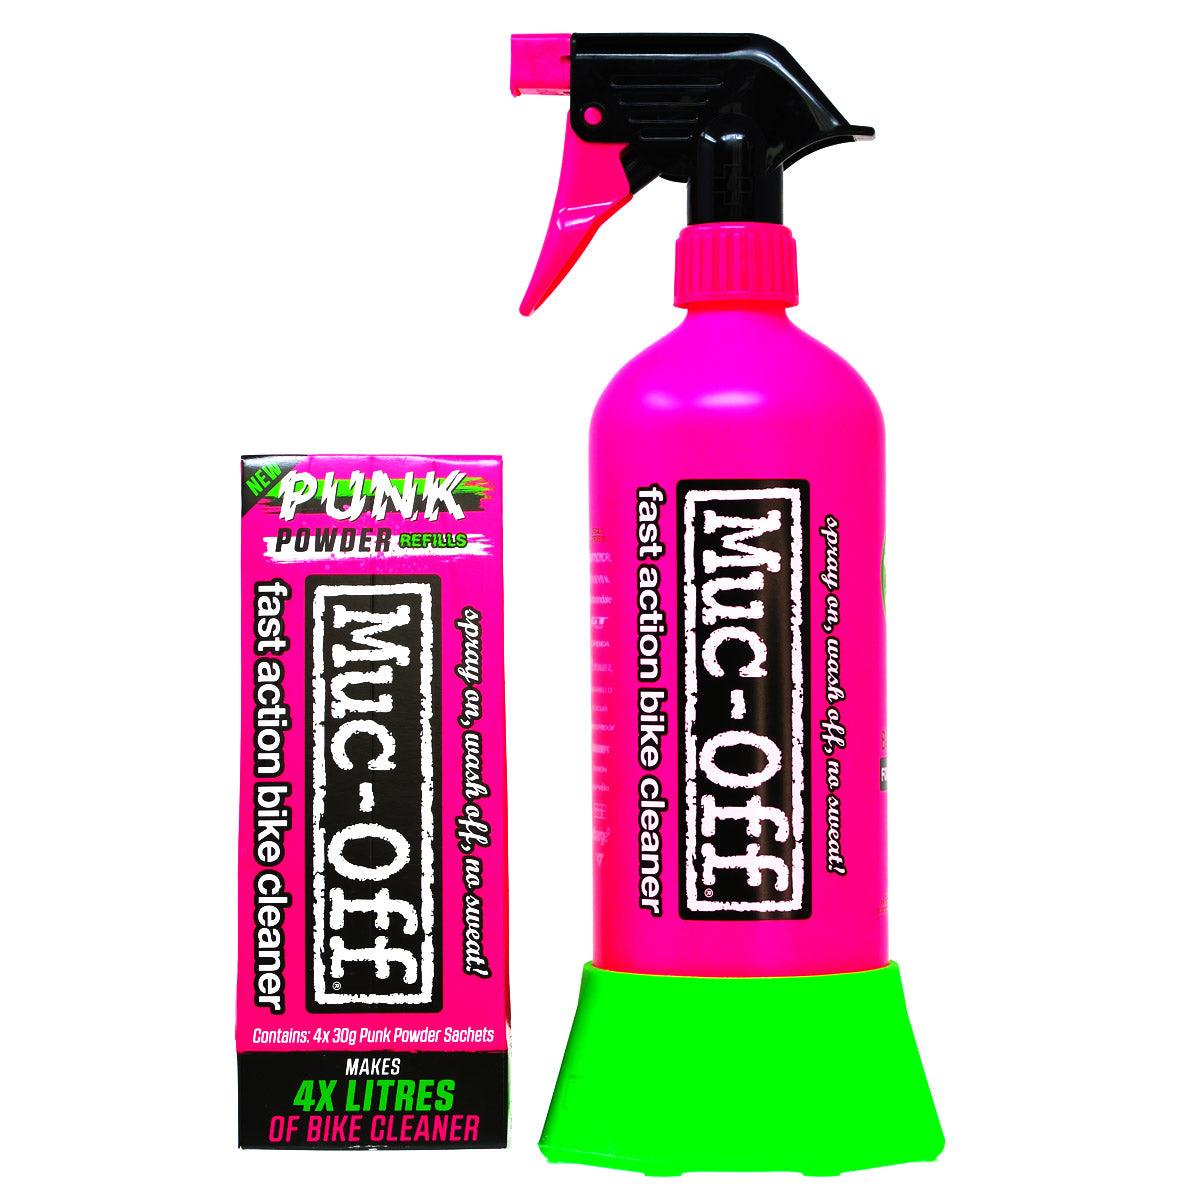 Muc-Off Bottle For Life Plus Punk Powder Bundle - The eco-friendly Bottle For Life cleaning solution for bikes of all kinds